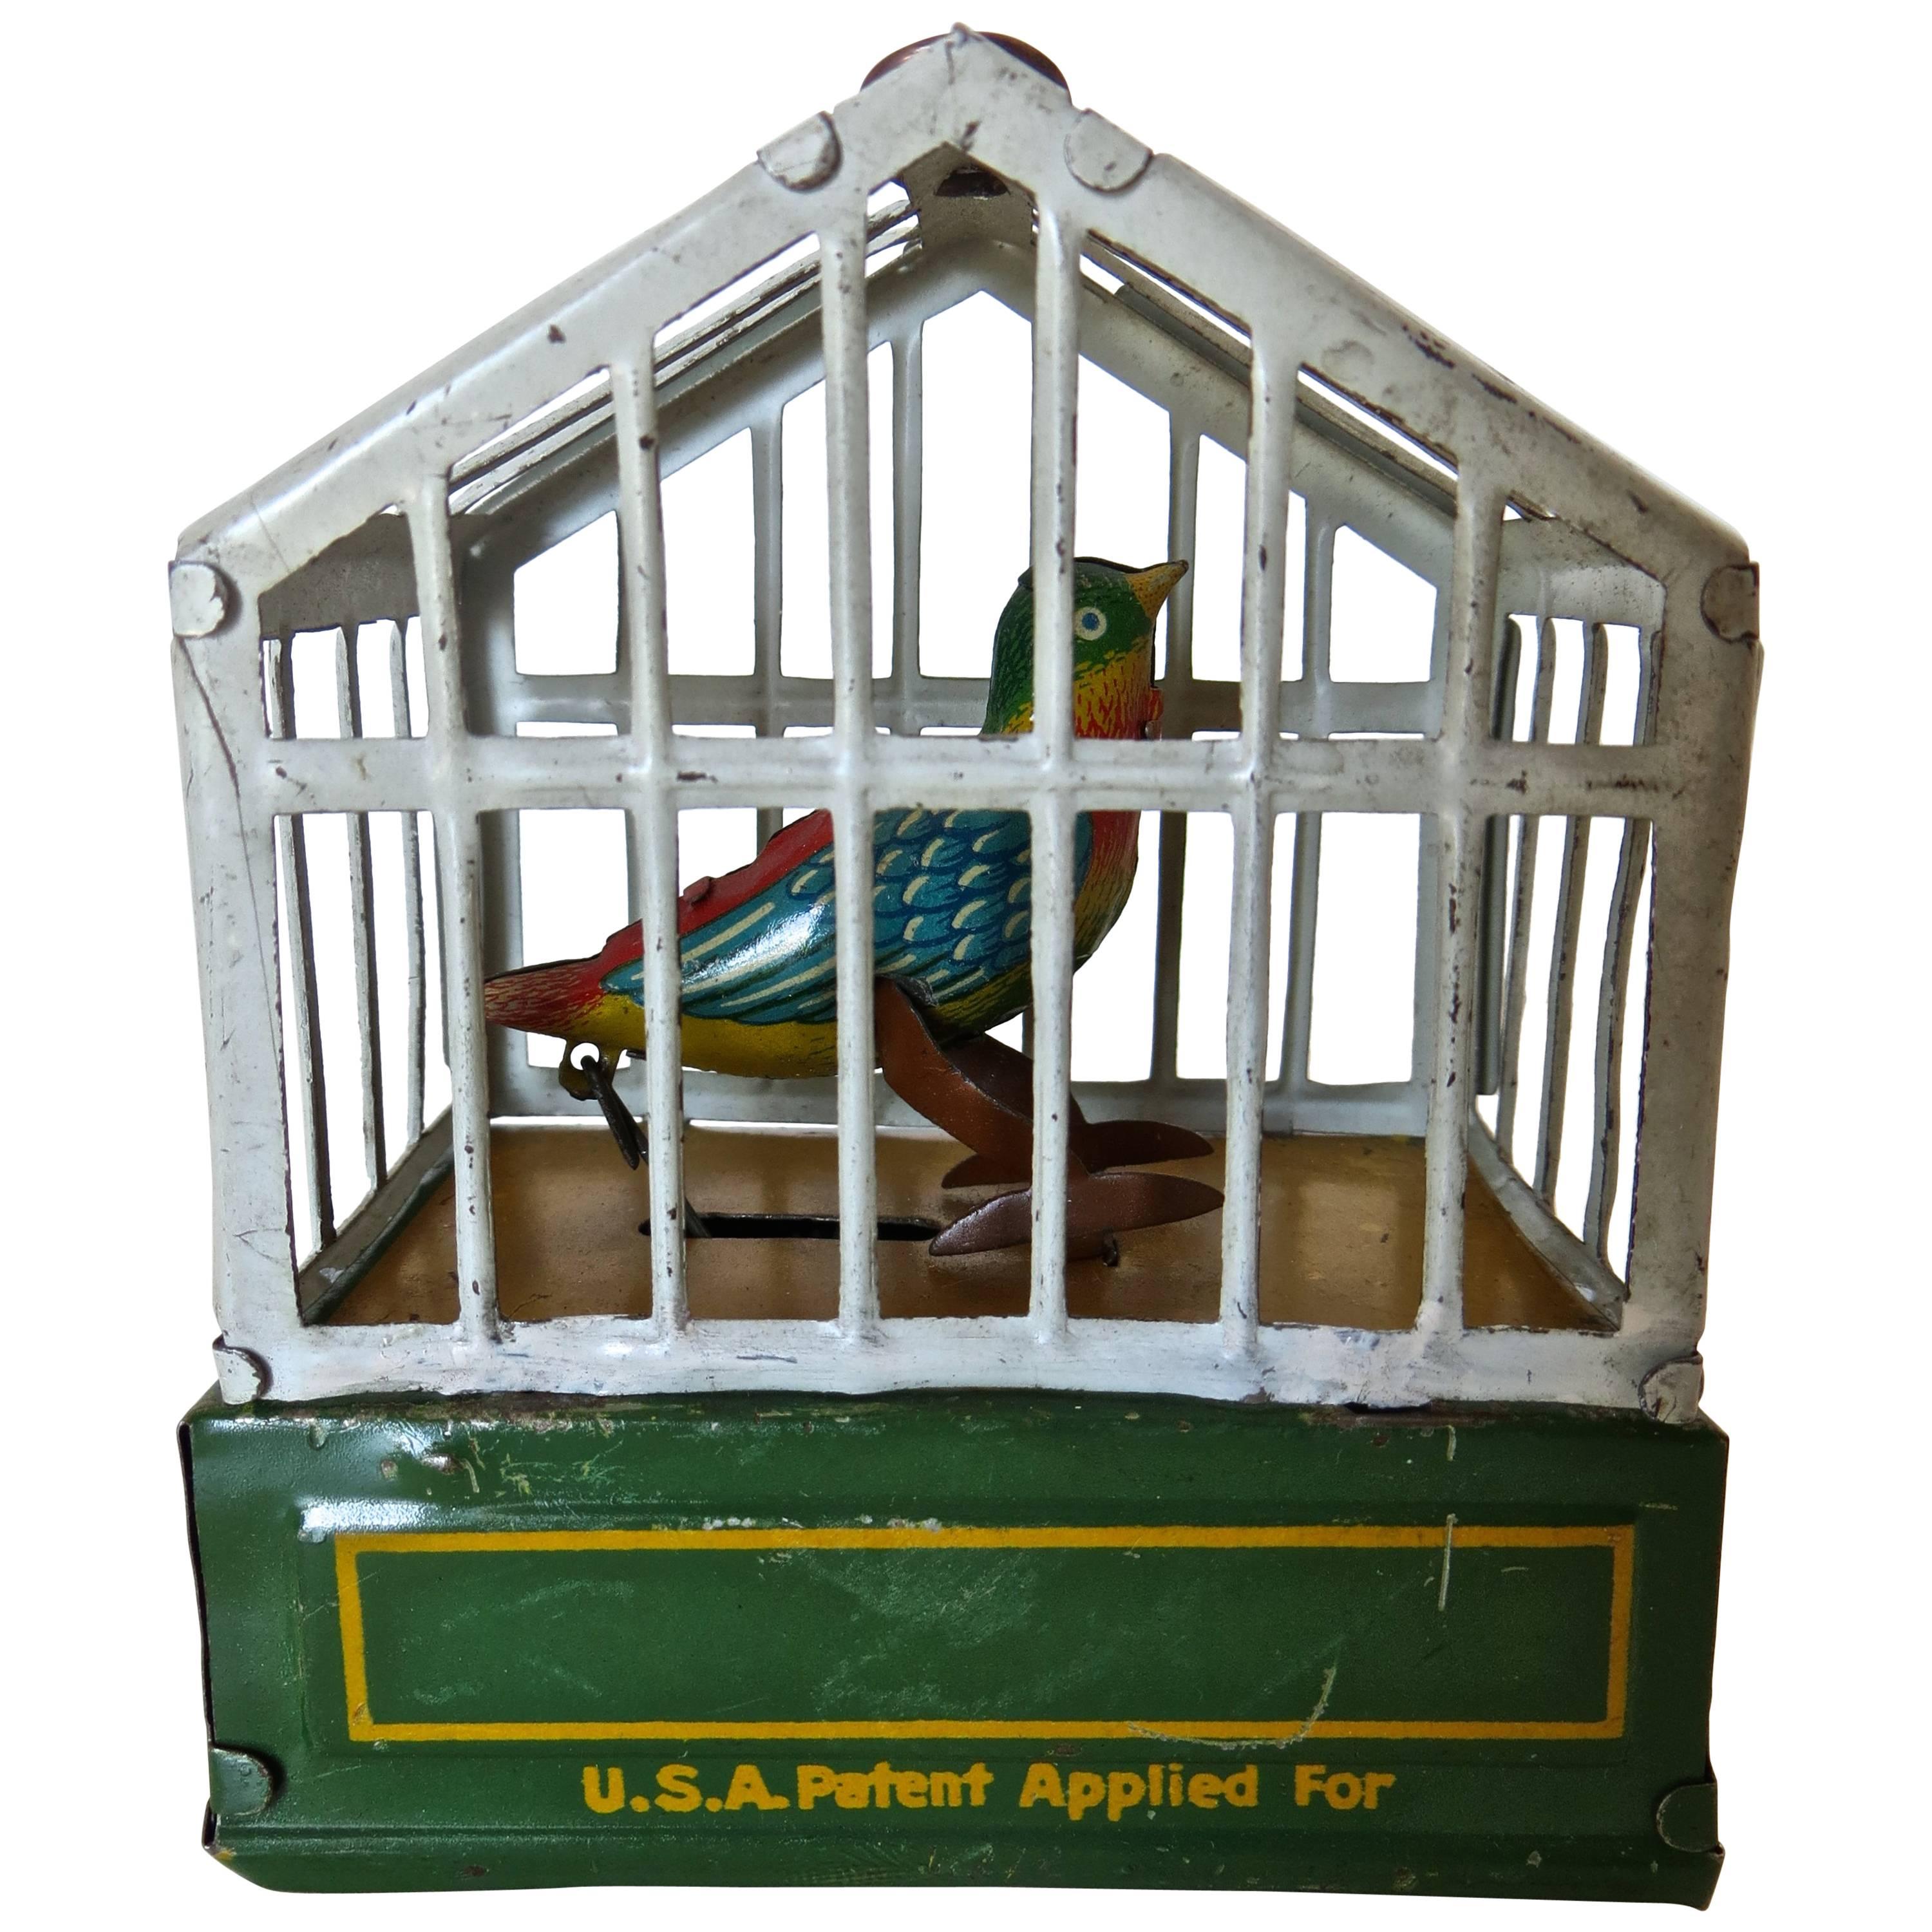 German "Song Bird in Cage" Toy, circa 1920